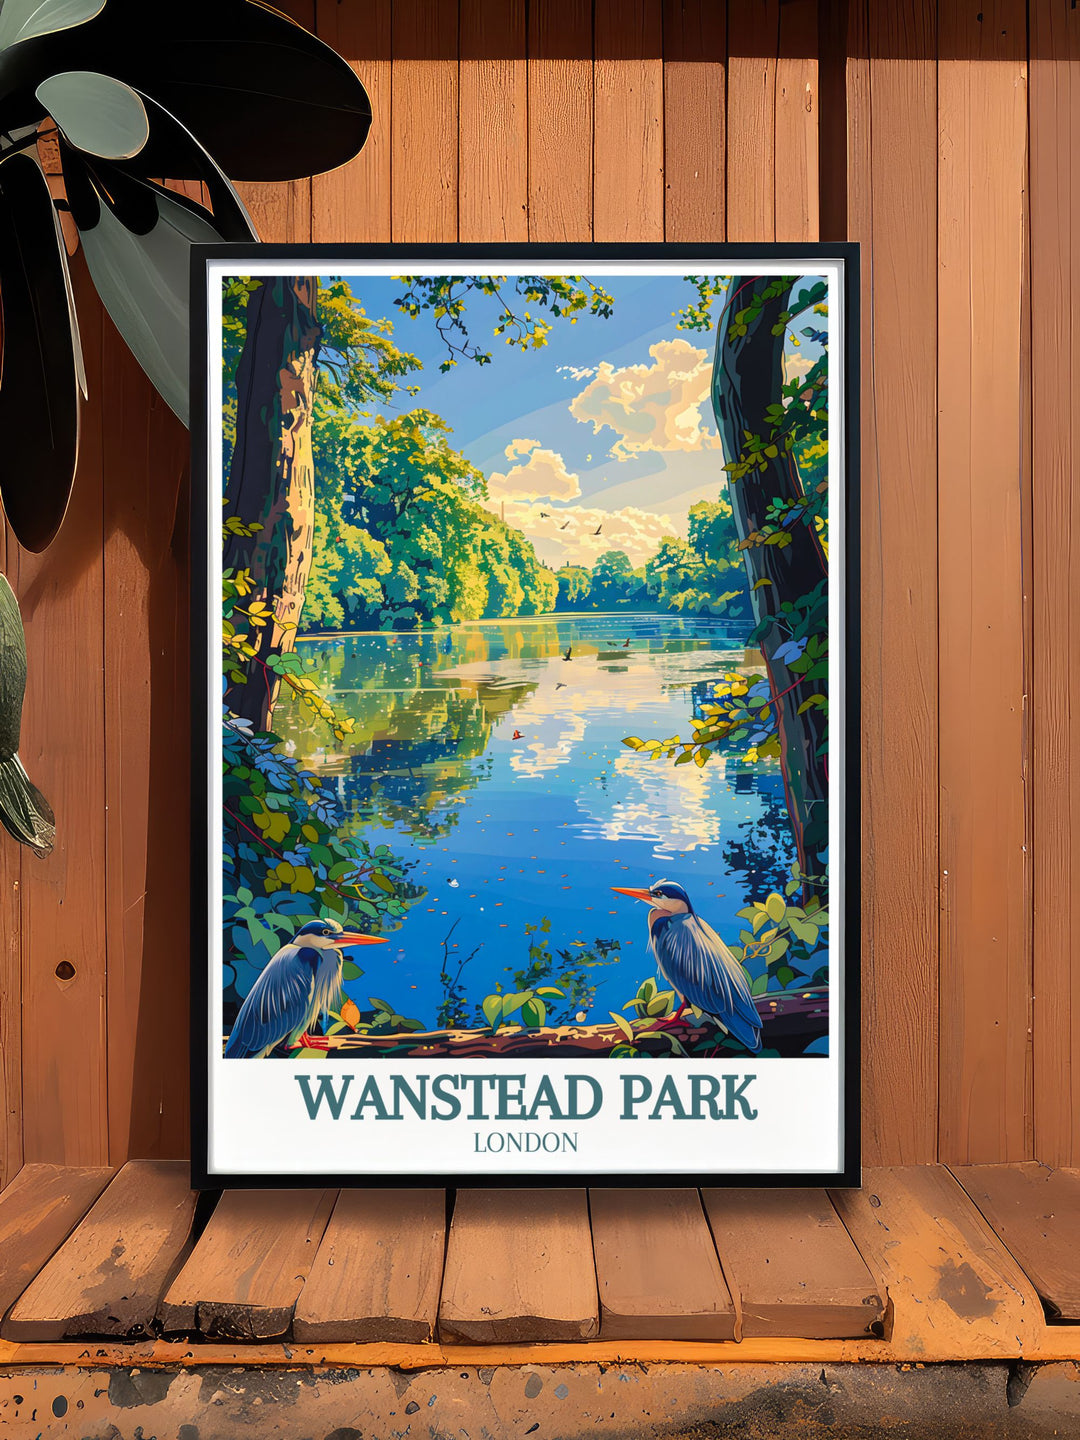 Elegant Wanstead Park prints capturing the parks tranquil beauty and vibrant greenery. These prints make wonderful additions to any nature themed home decor collection and are perfect for gifts